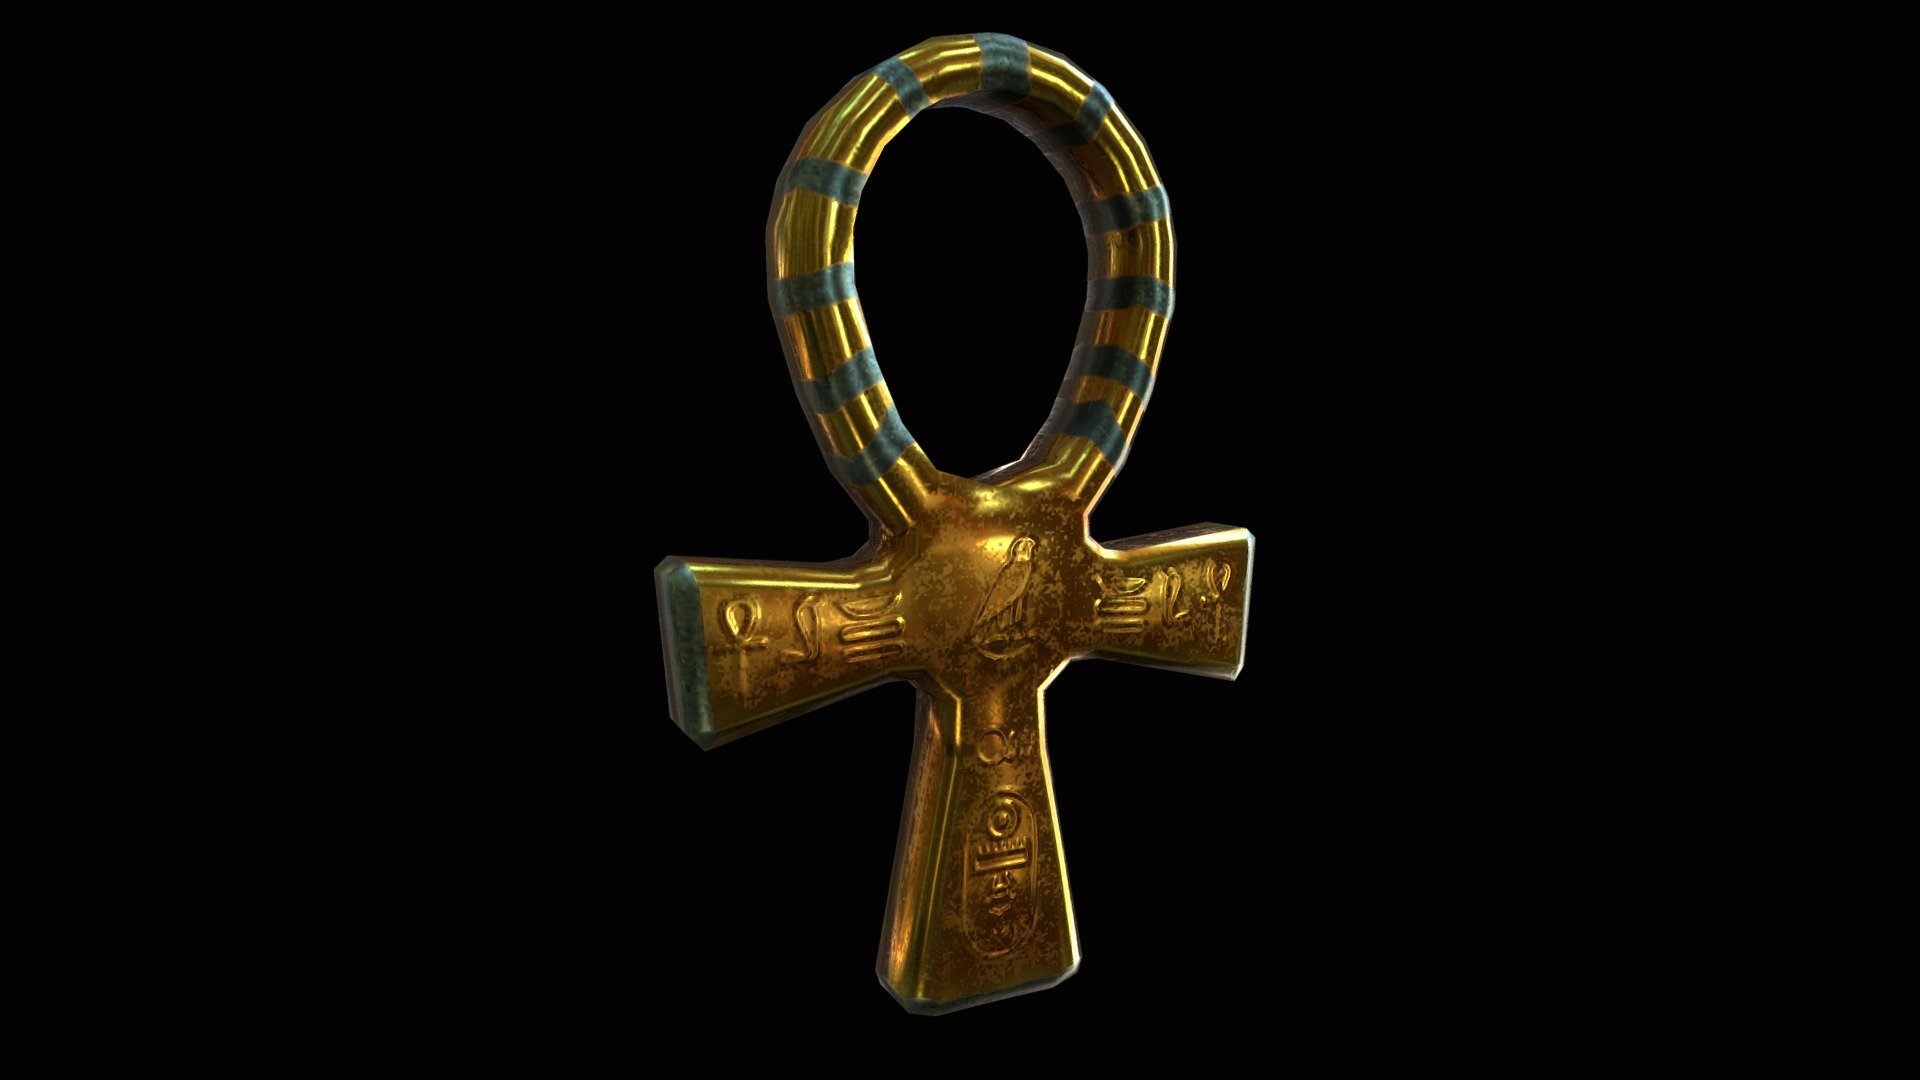 An Ankh artifact asset for download (512x512 textures) (cc attribution license)

License
Credit Scrampunk - Ankh Asset - Download Free 3D model by scrampunk 3d model